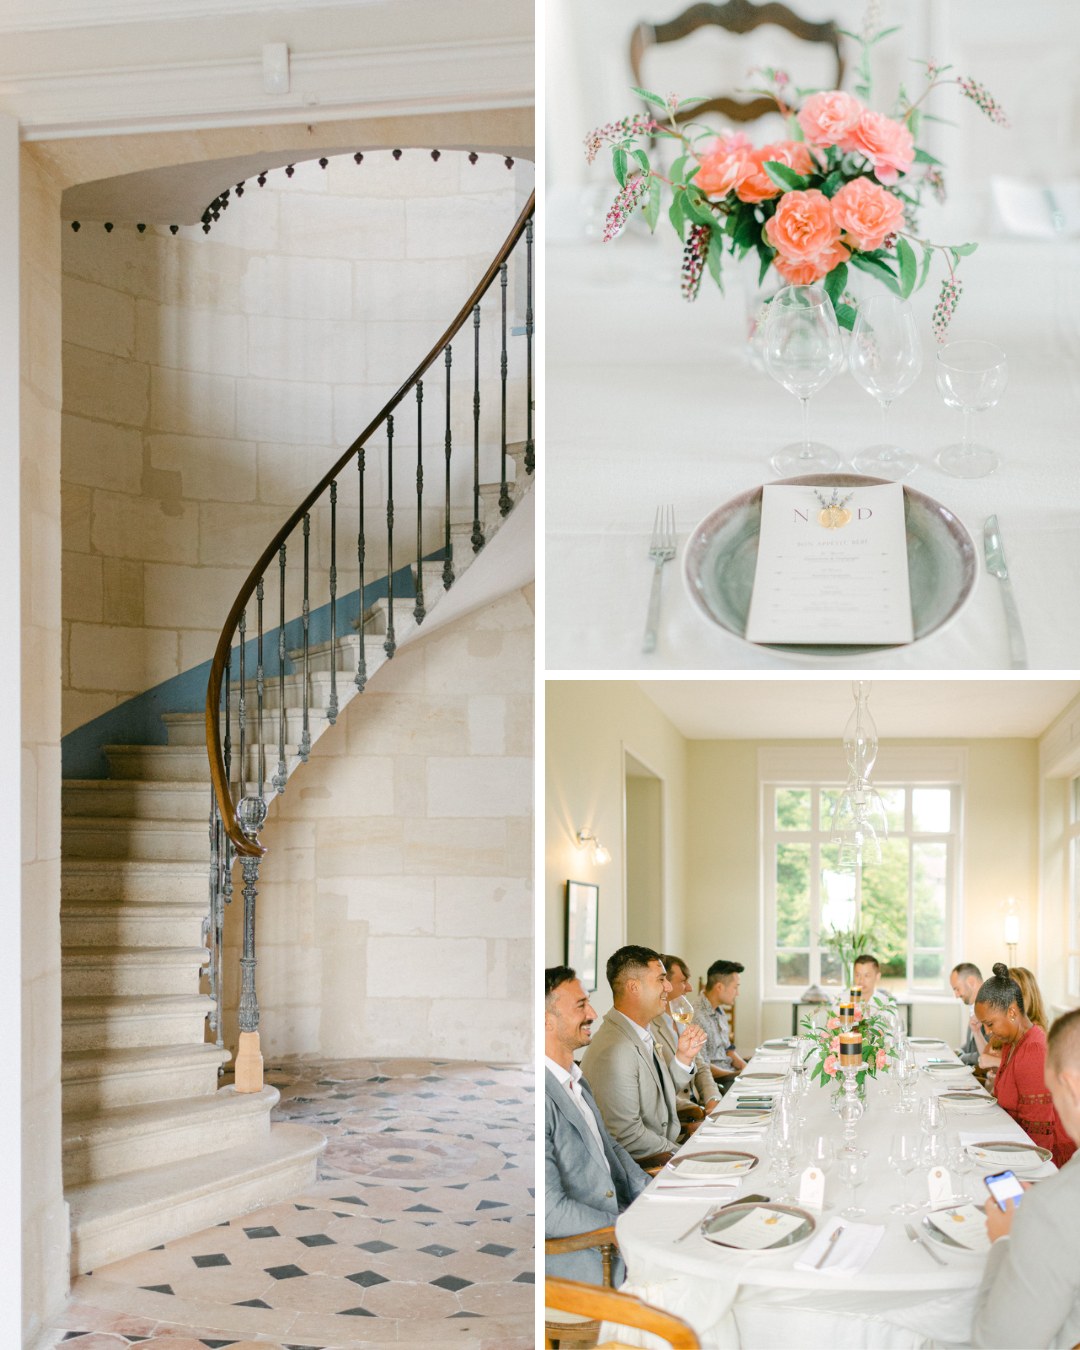 A three-part image: the first part shows a spiral staircase with a stone wall and metal railing. The second part displays a table set with a floral centerpiece of pink roses and a menu. The third part shows people seated at a dining table in a well-lit room.